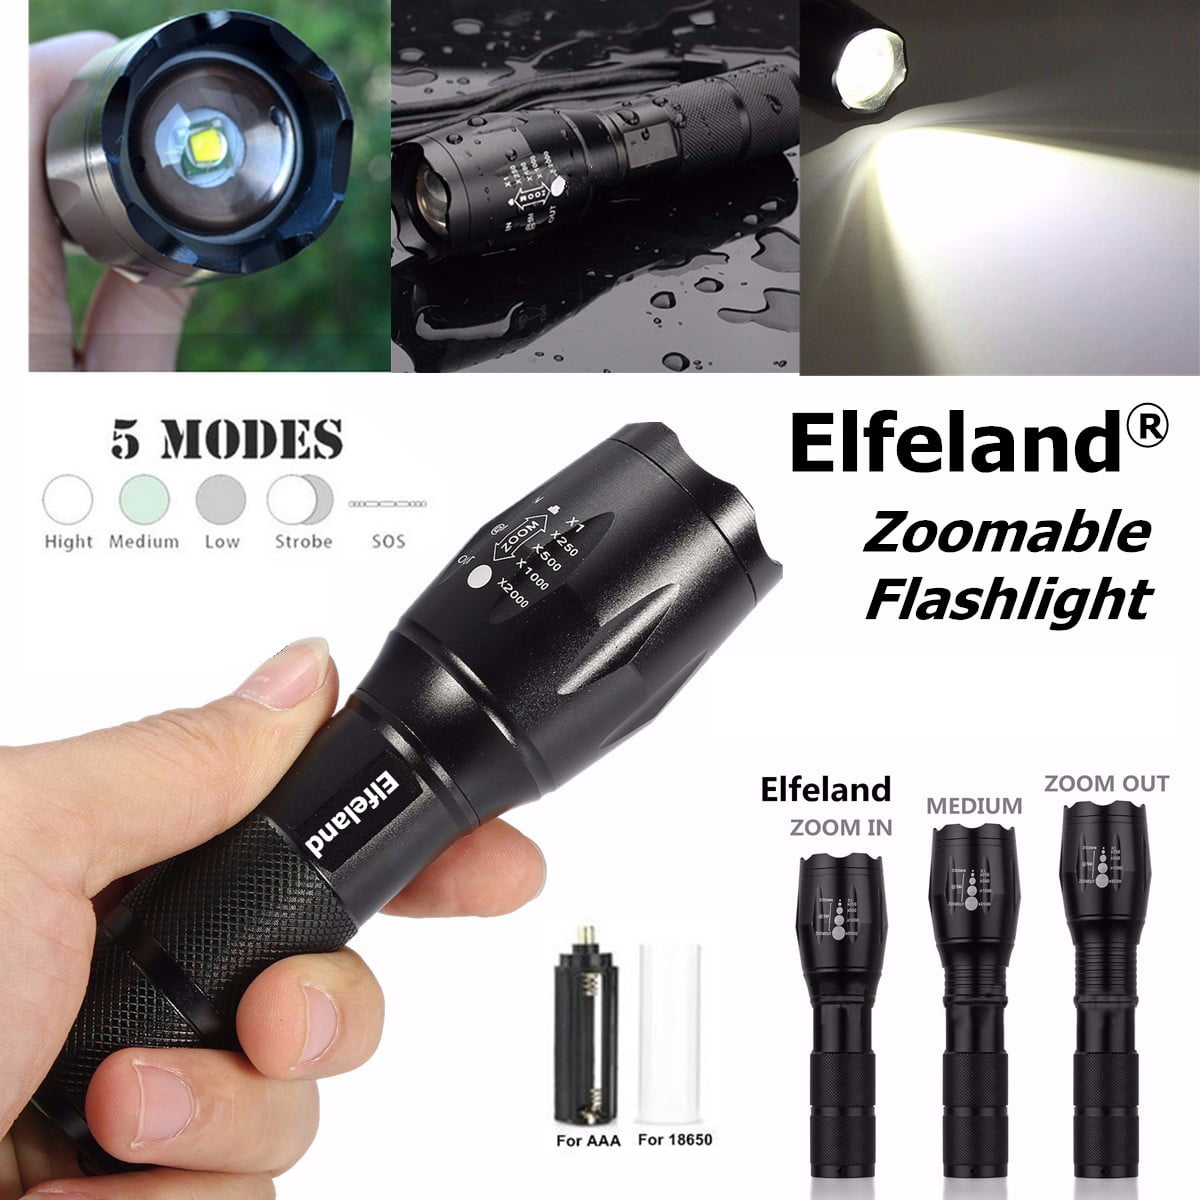 Niwalker Ultra Bright High Lumens LED Tactical Flashlight Powerful IPX7 Waterproof Zoomable Adjustable Focus 5 Modes for Camping and Hiking Outdoor 